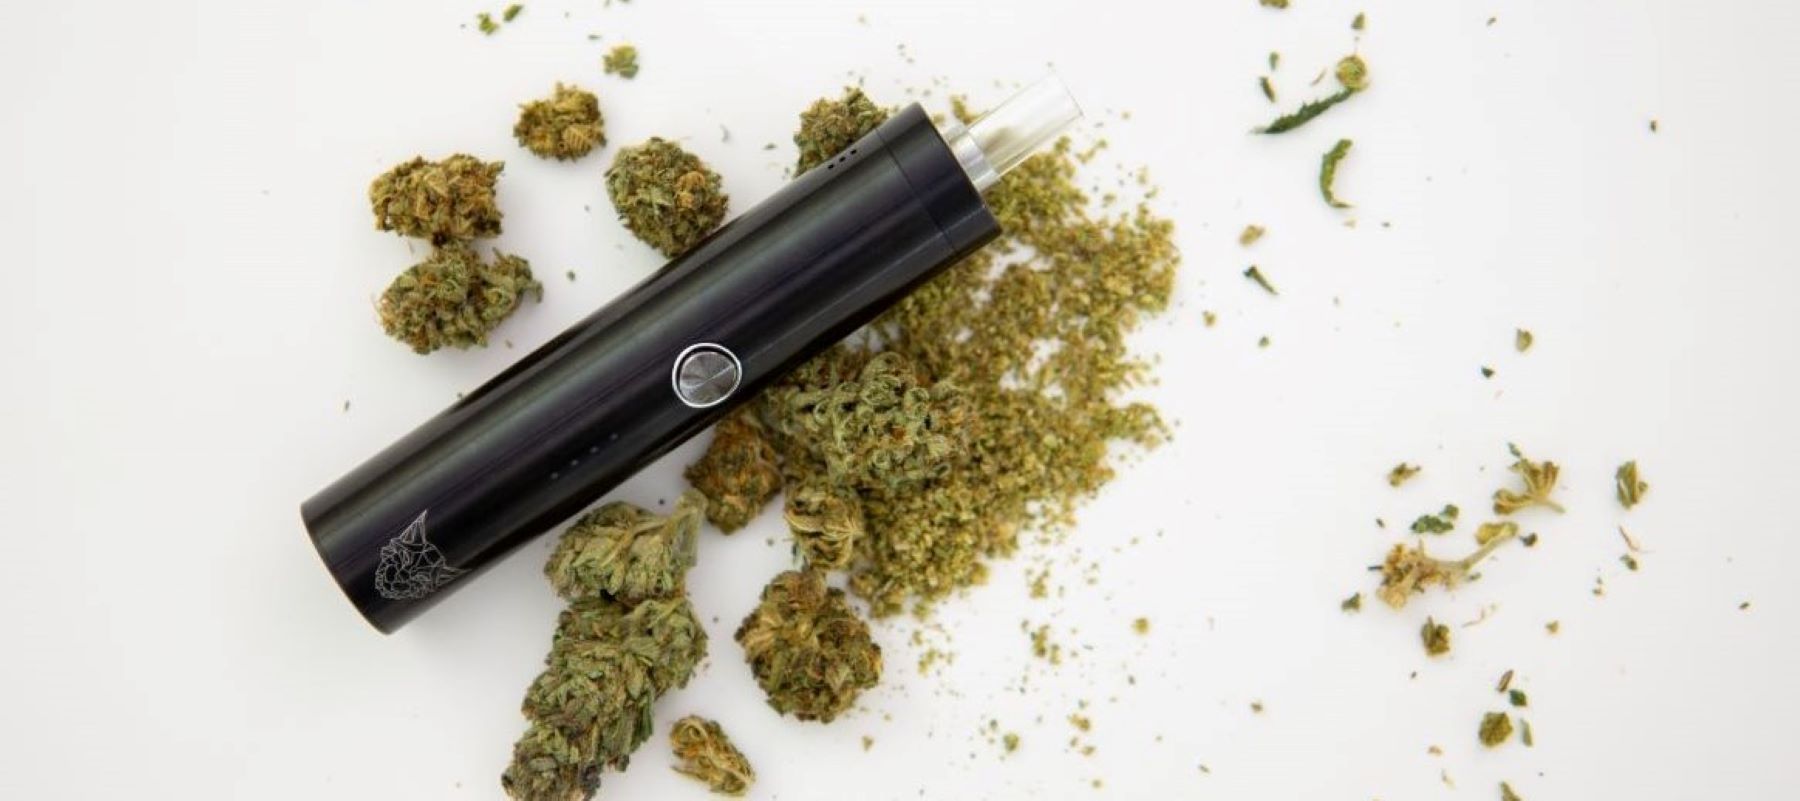 The Linx Eden Dry Herb Vaporizer with Cannabis Flower 